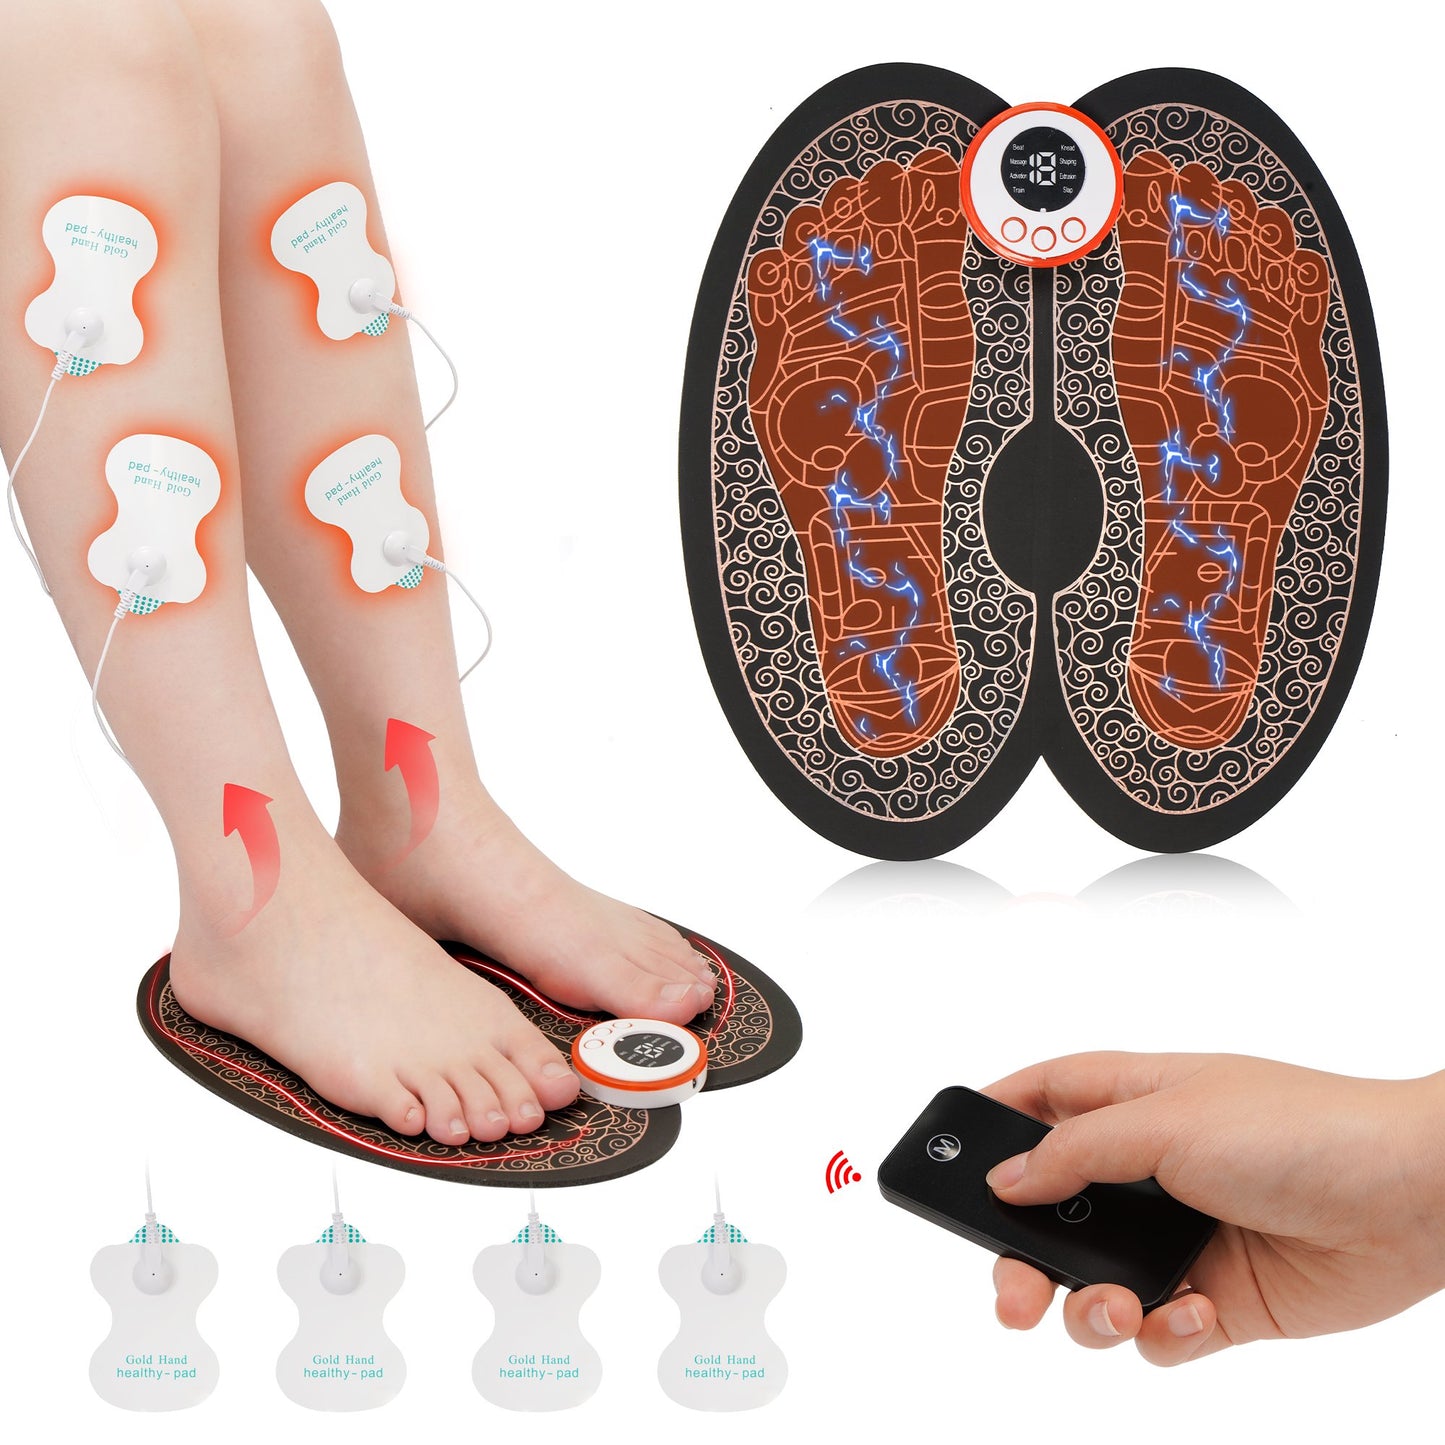 KEKOY Remote Controllable EMS Foot Massage Pad in Foldable Design